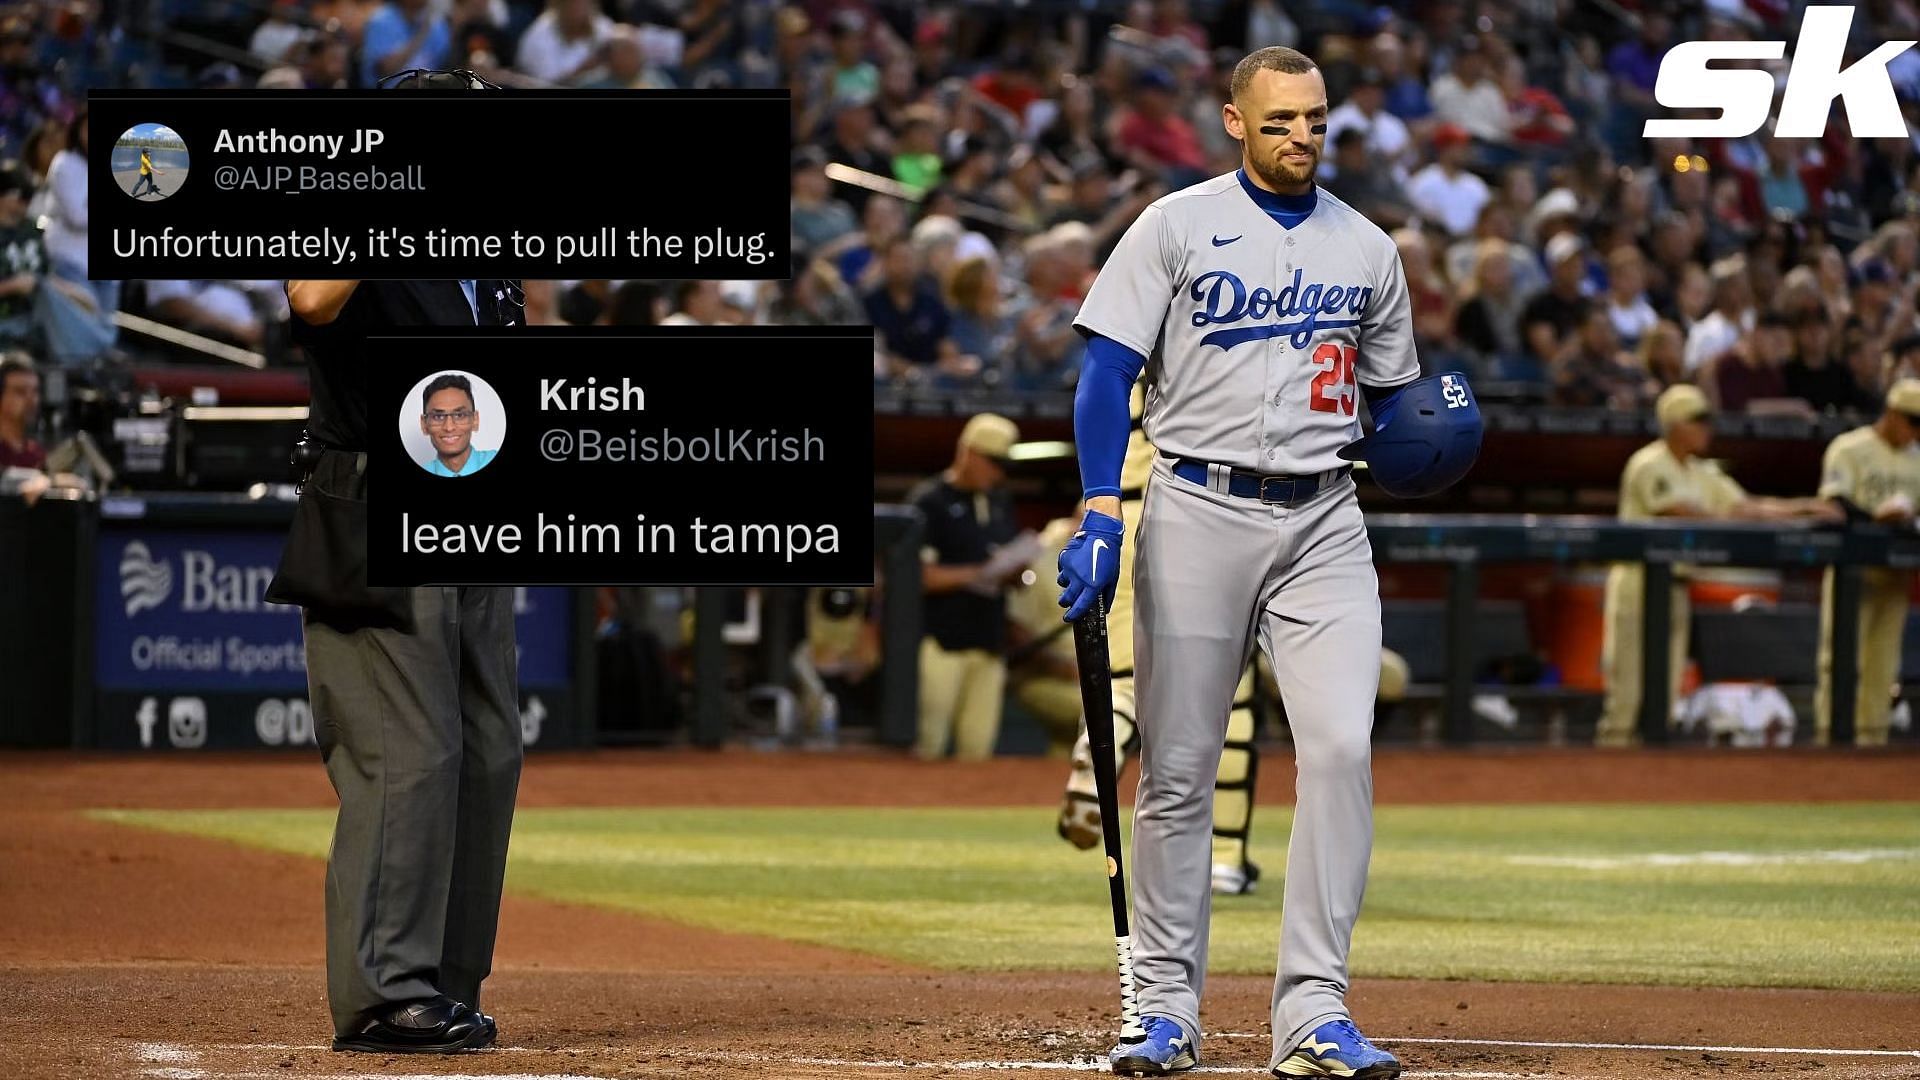 Los Angeles Dodgers fans frustrated as Trayce Thompson continues to  struggle offensively: Unfortunately, it's time to pull the plug